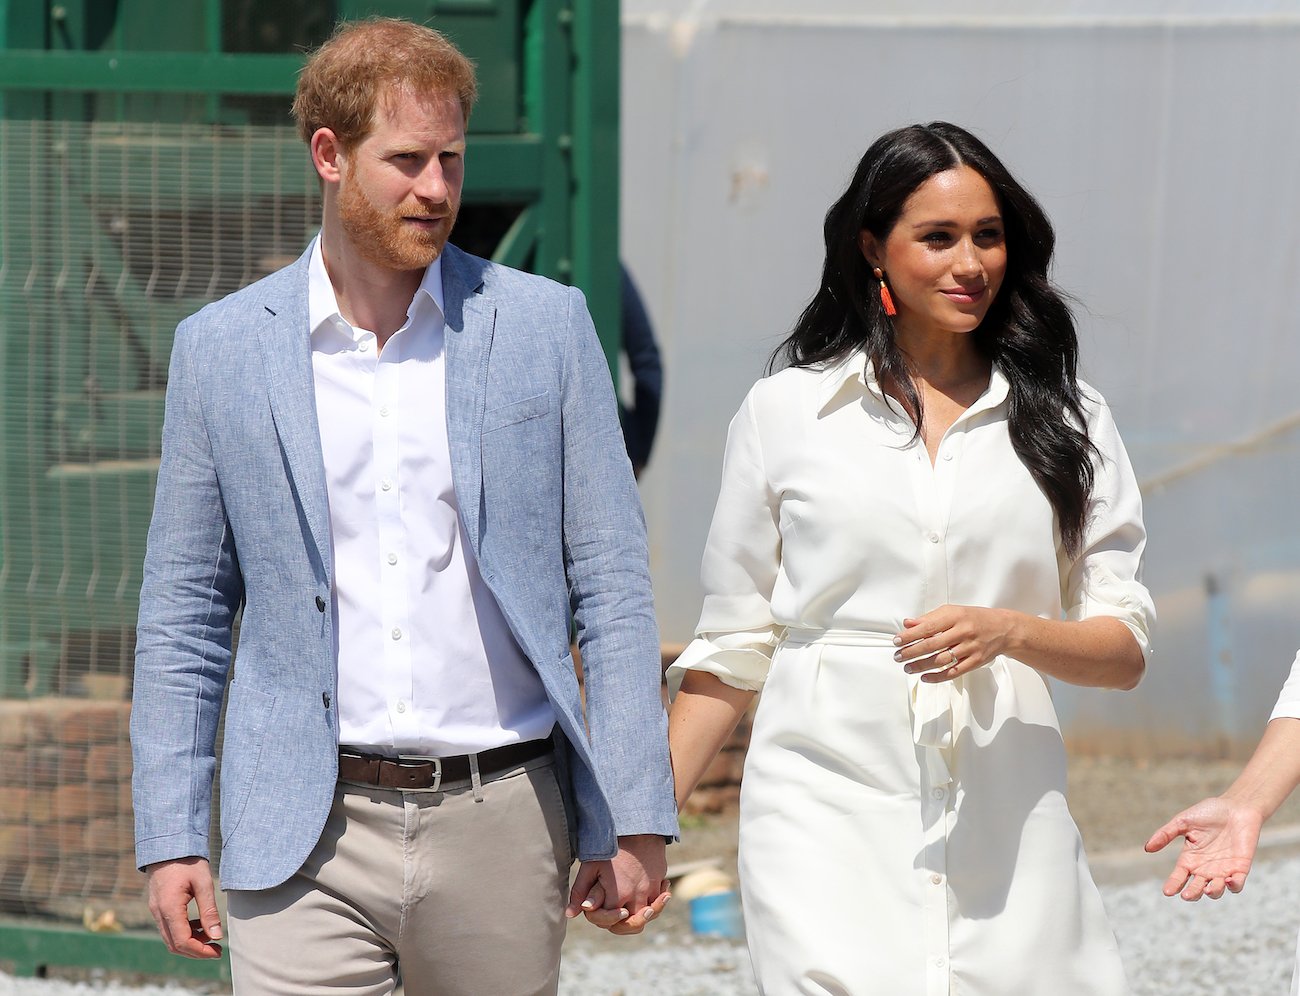 Body Language Expert Points Out Way Prince Harry And Meghan Markle Use